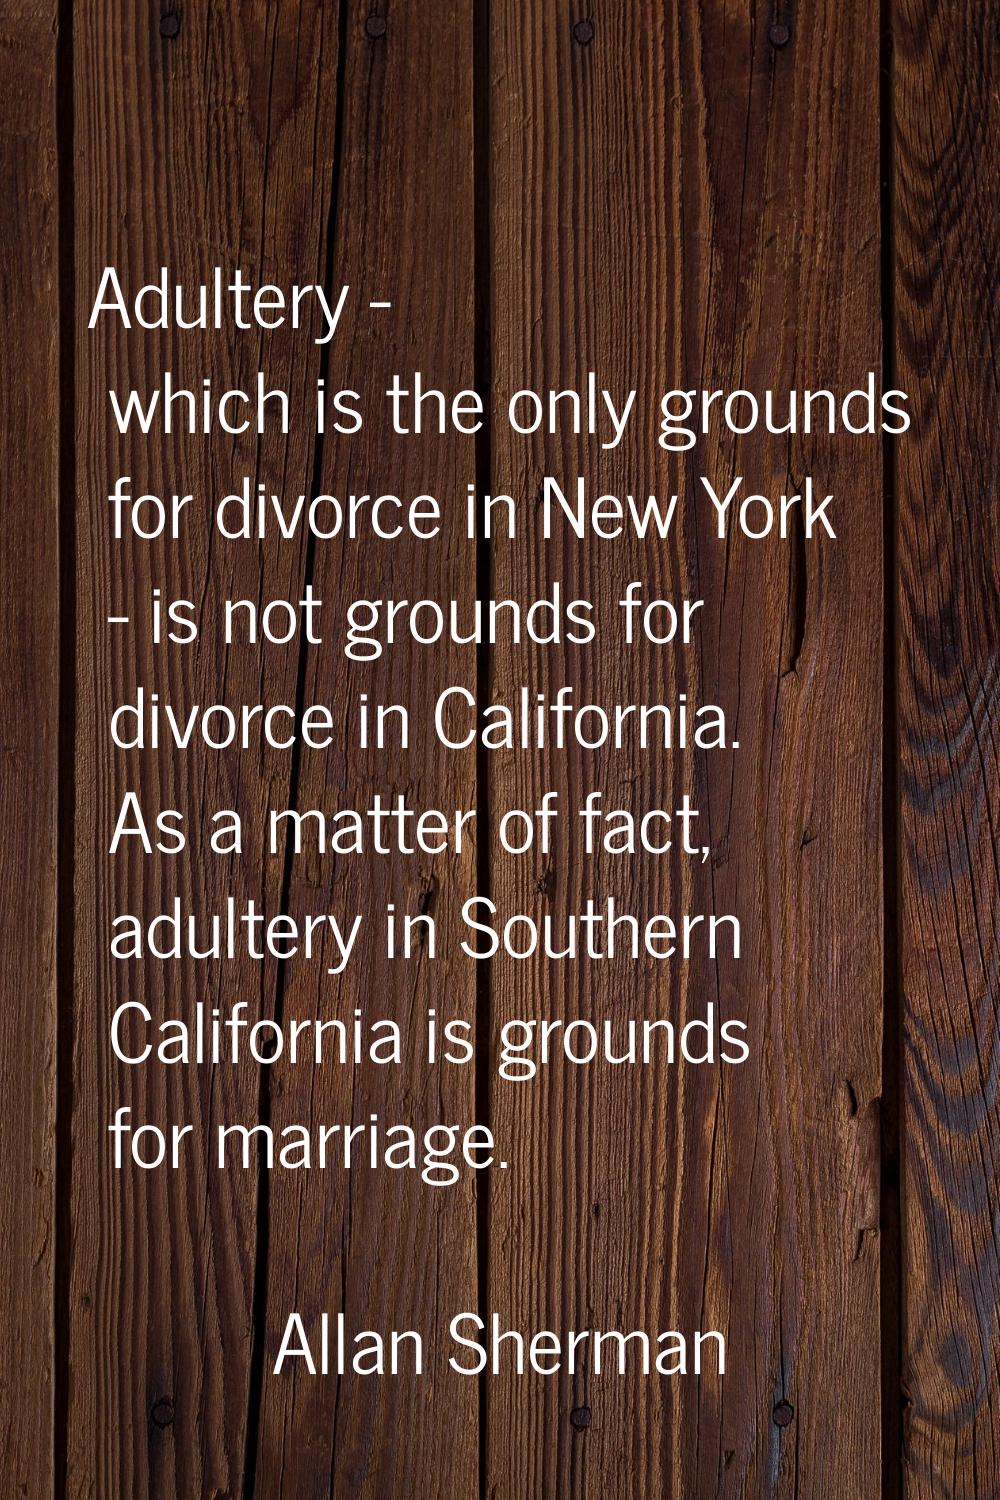 Adultery - which is the only grounds for divorce in New York - is not grounds for divorce in Califo